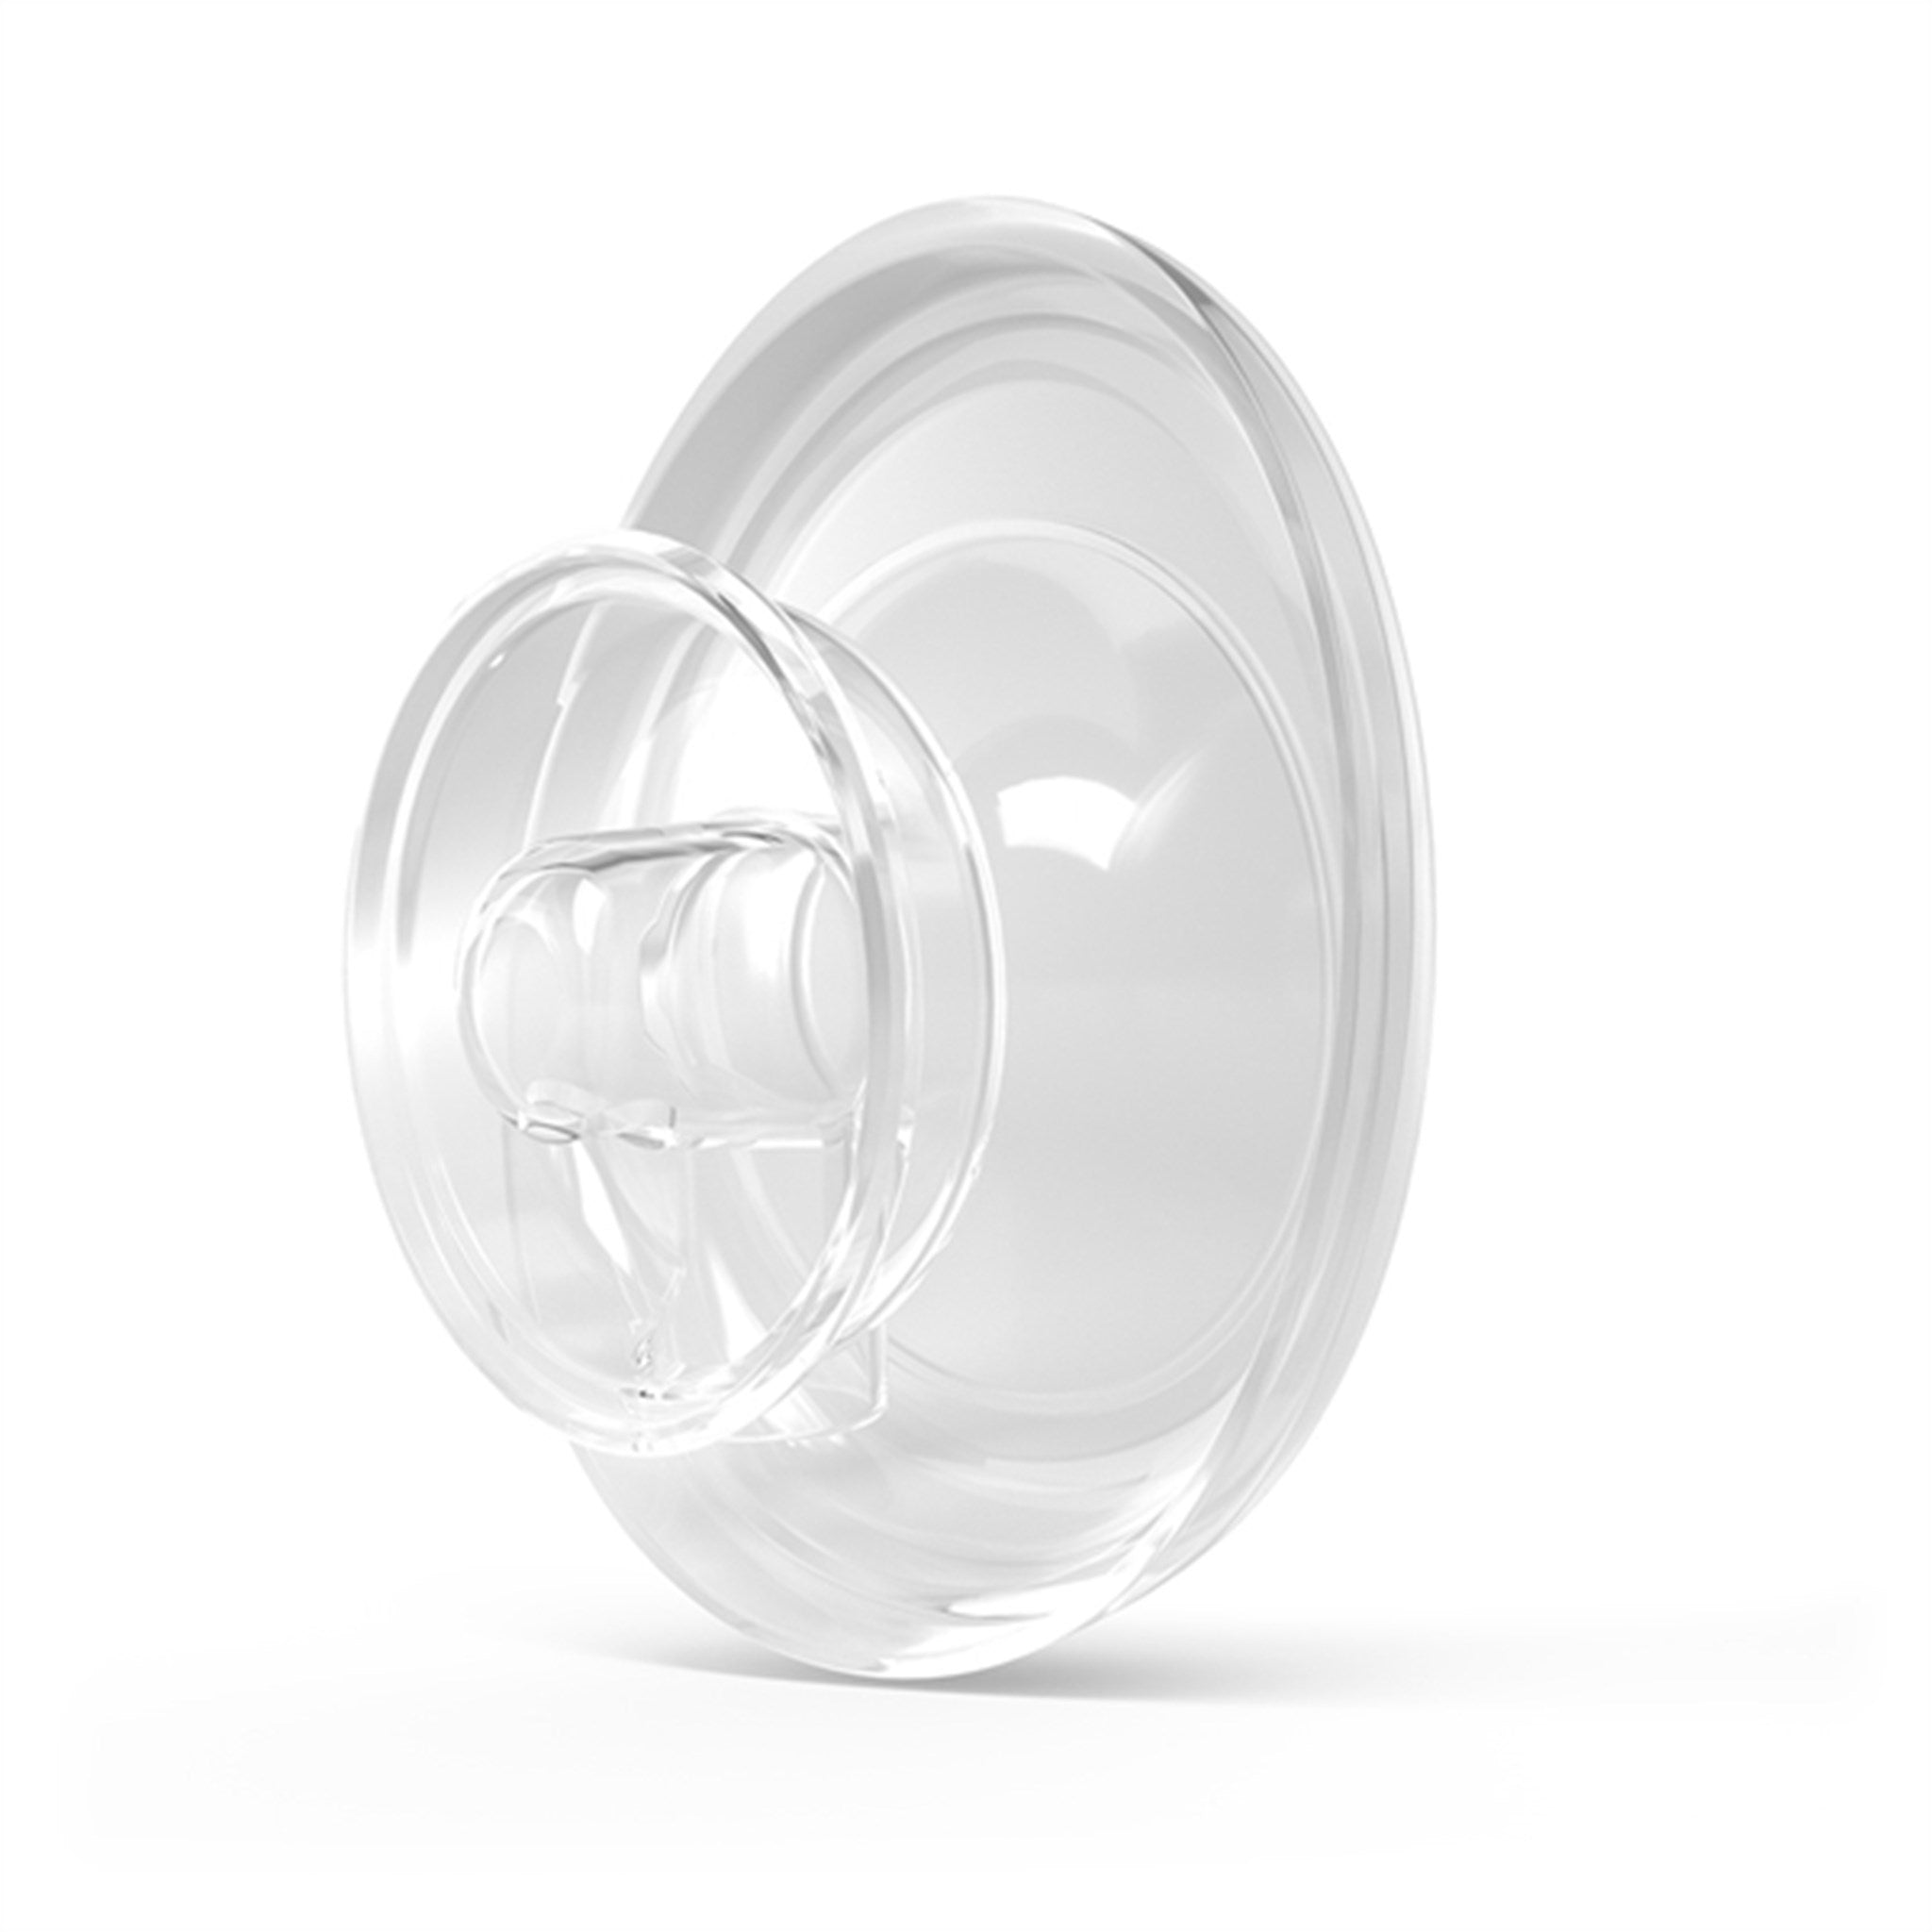 Elvie Stride Breast Shield 24 mm 2-Pack White/Clear